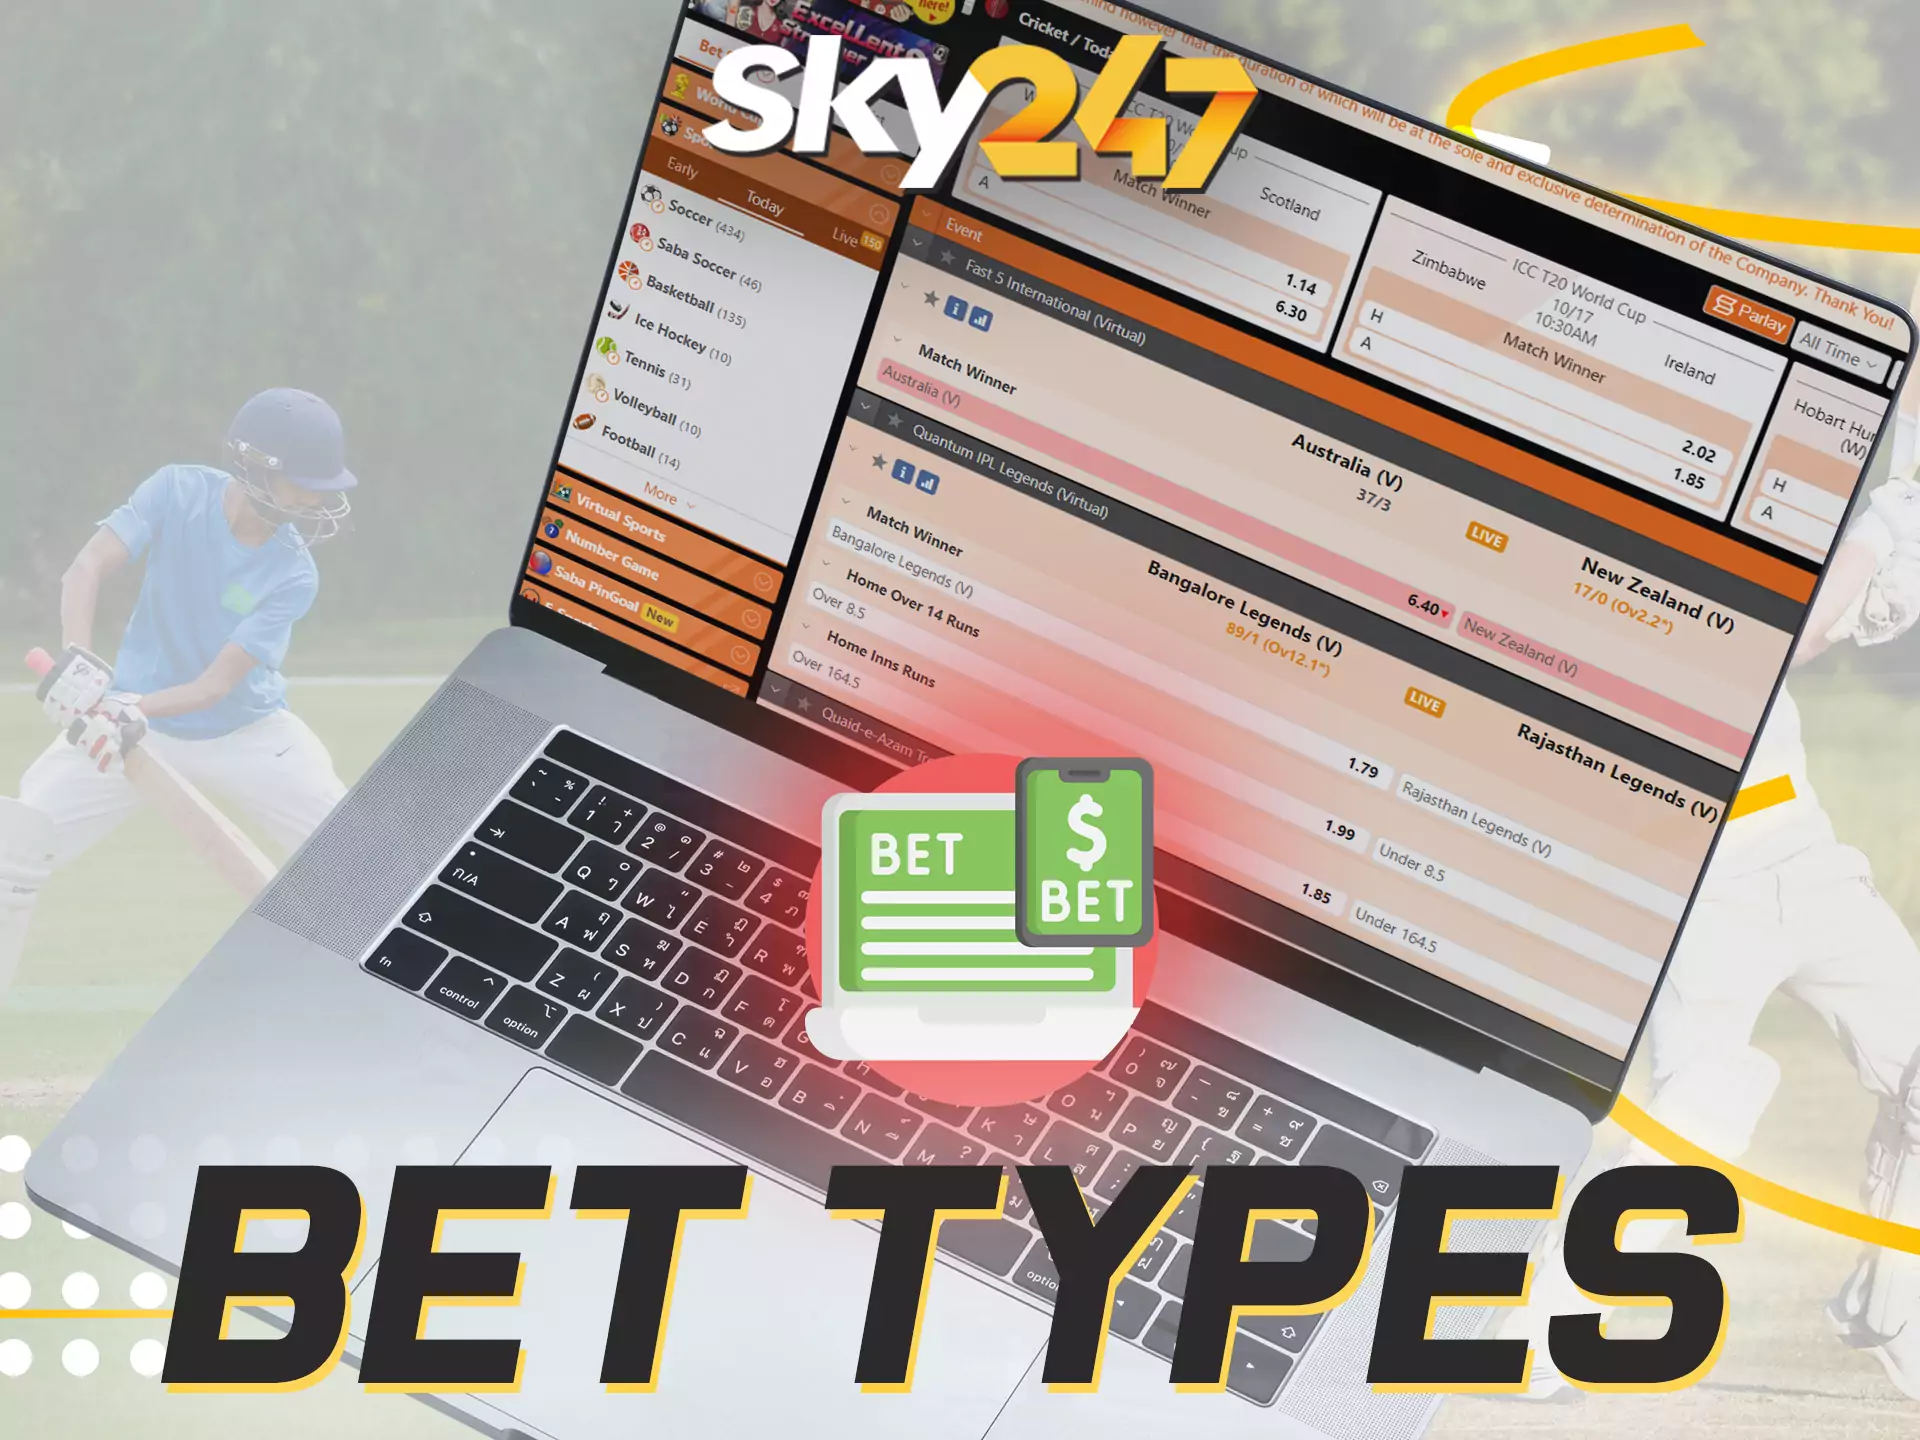 On Sky247, you can place different types of bets.